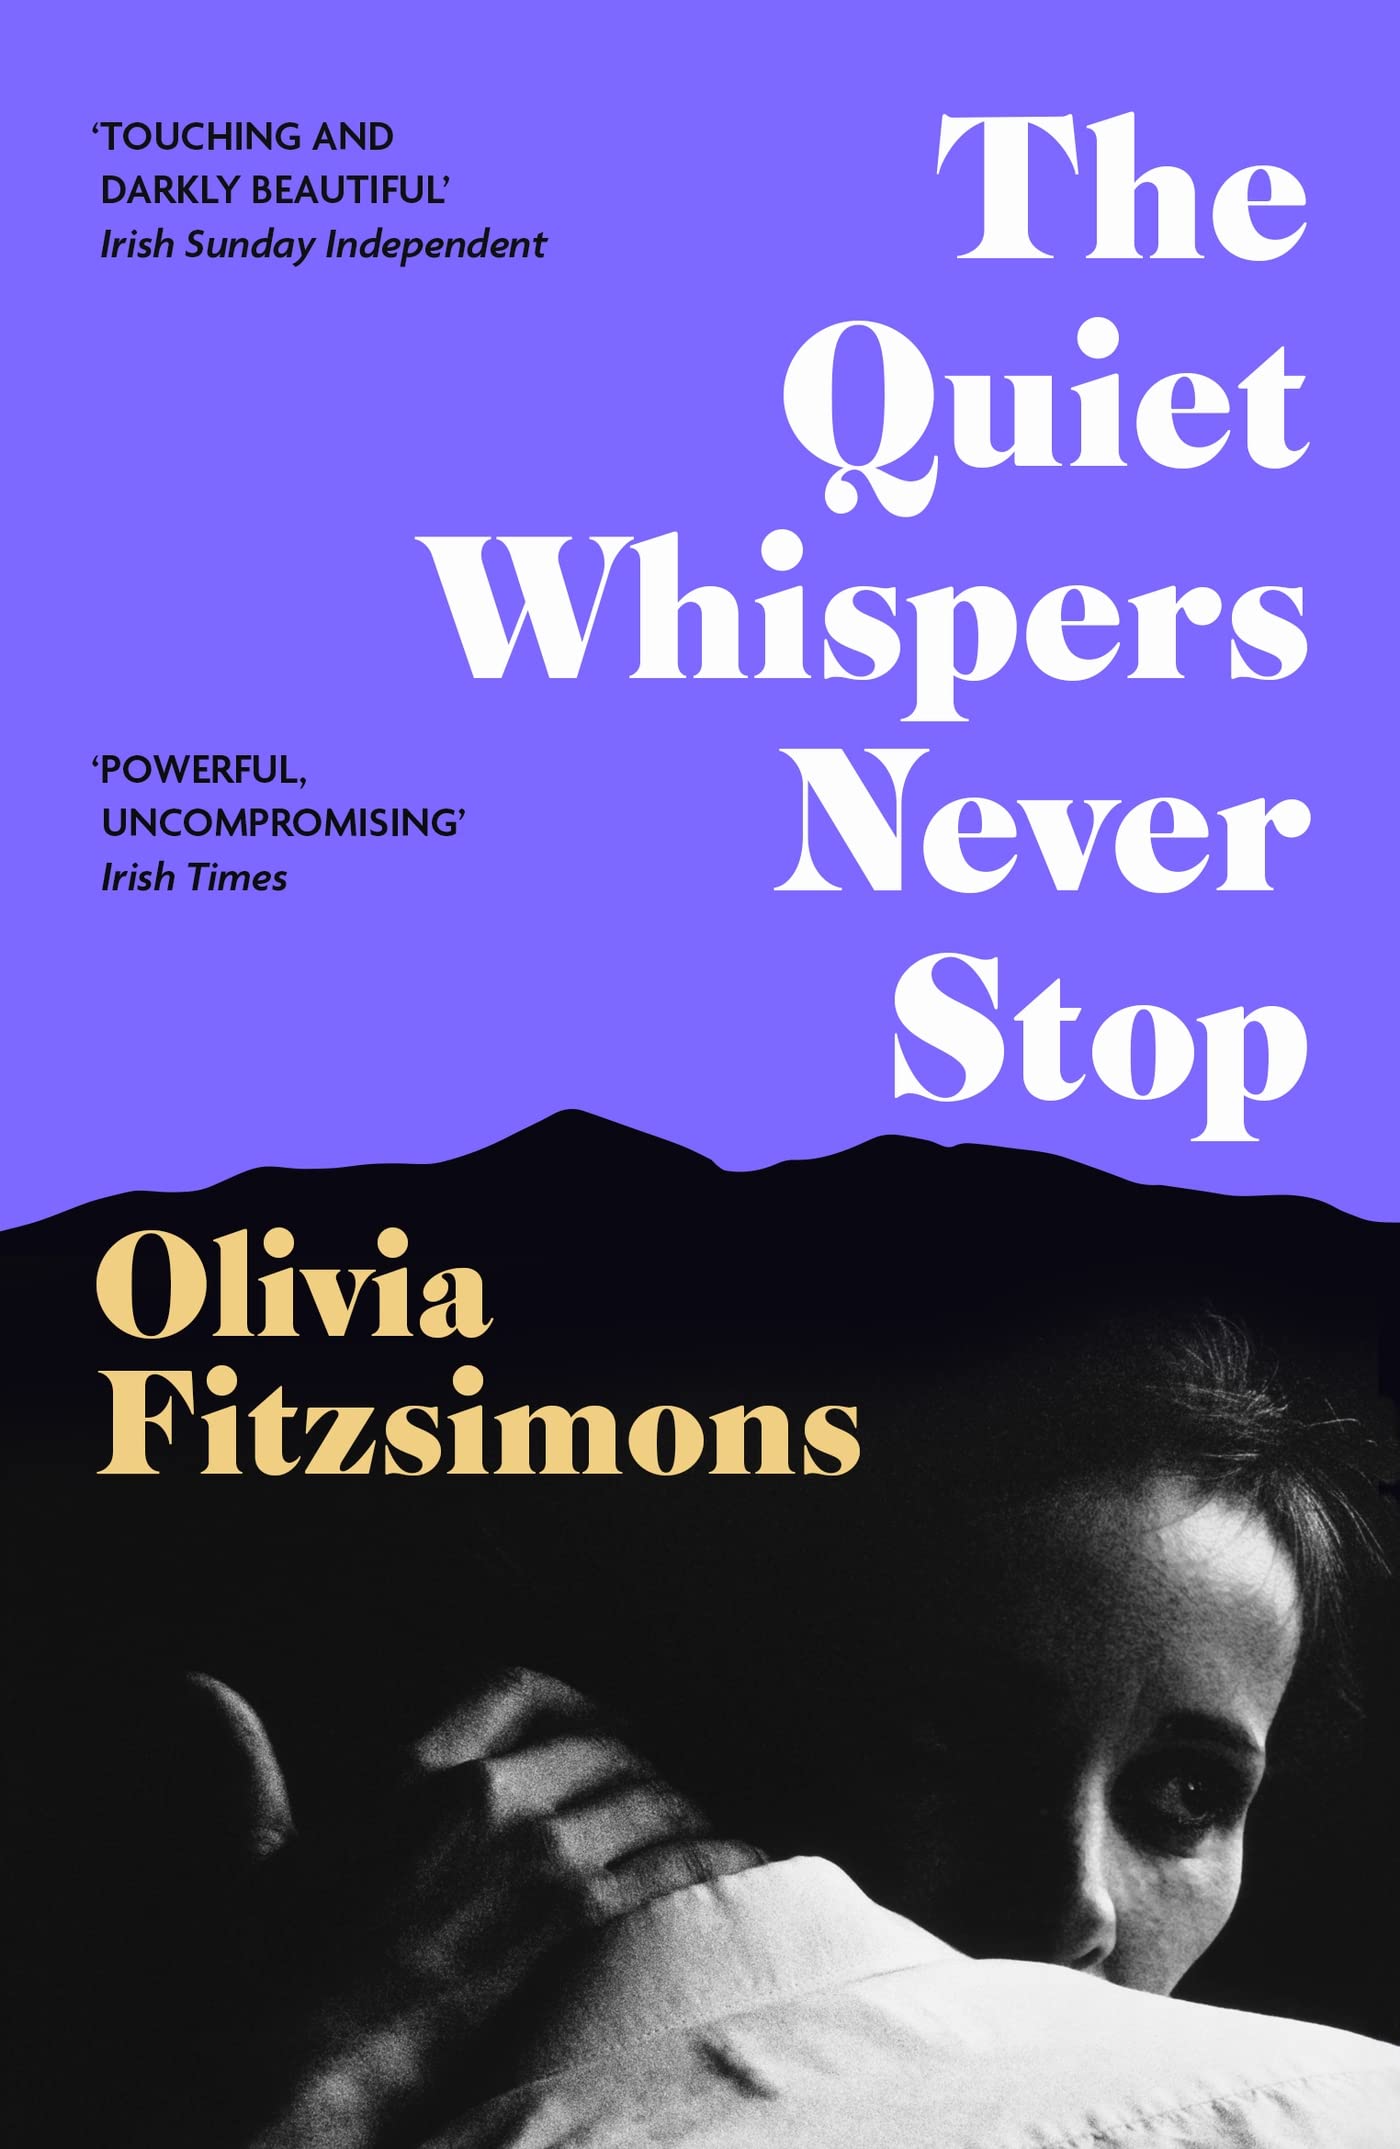 The Quiet Whispers Never Stop by Olivia Fitzsimons